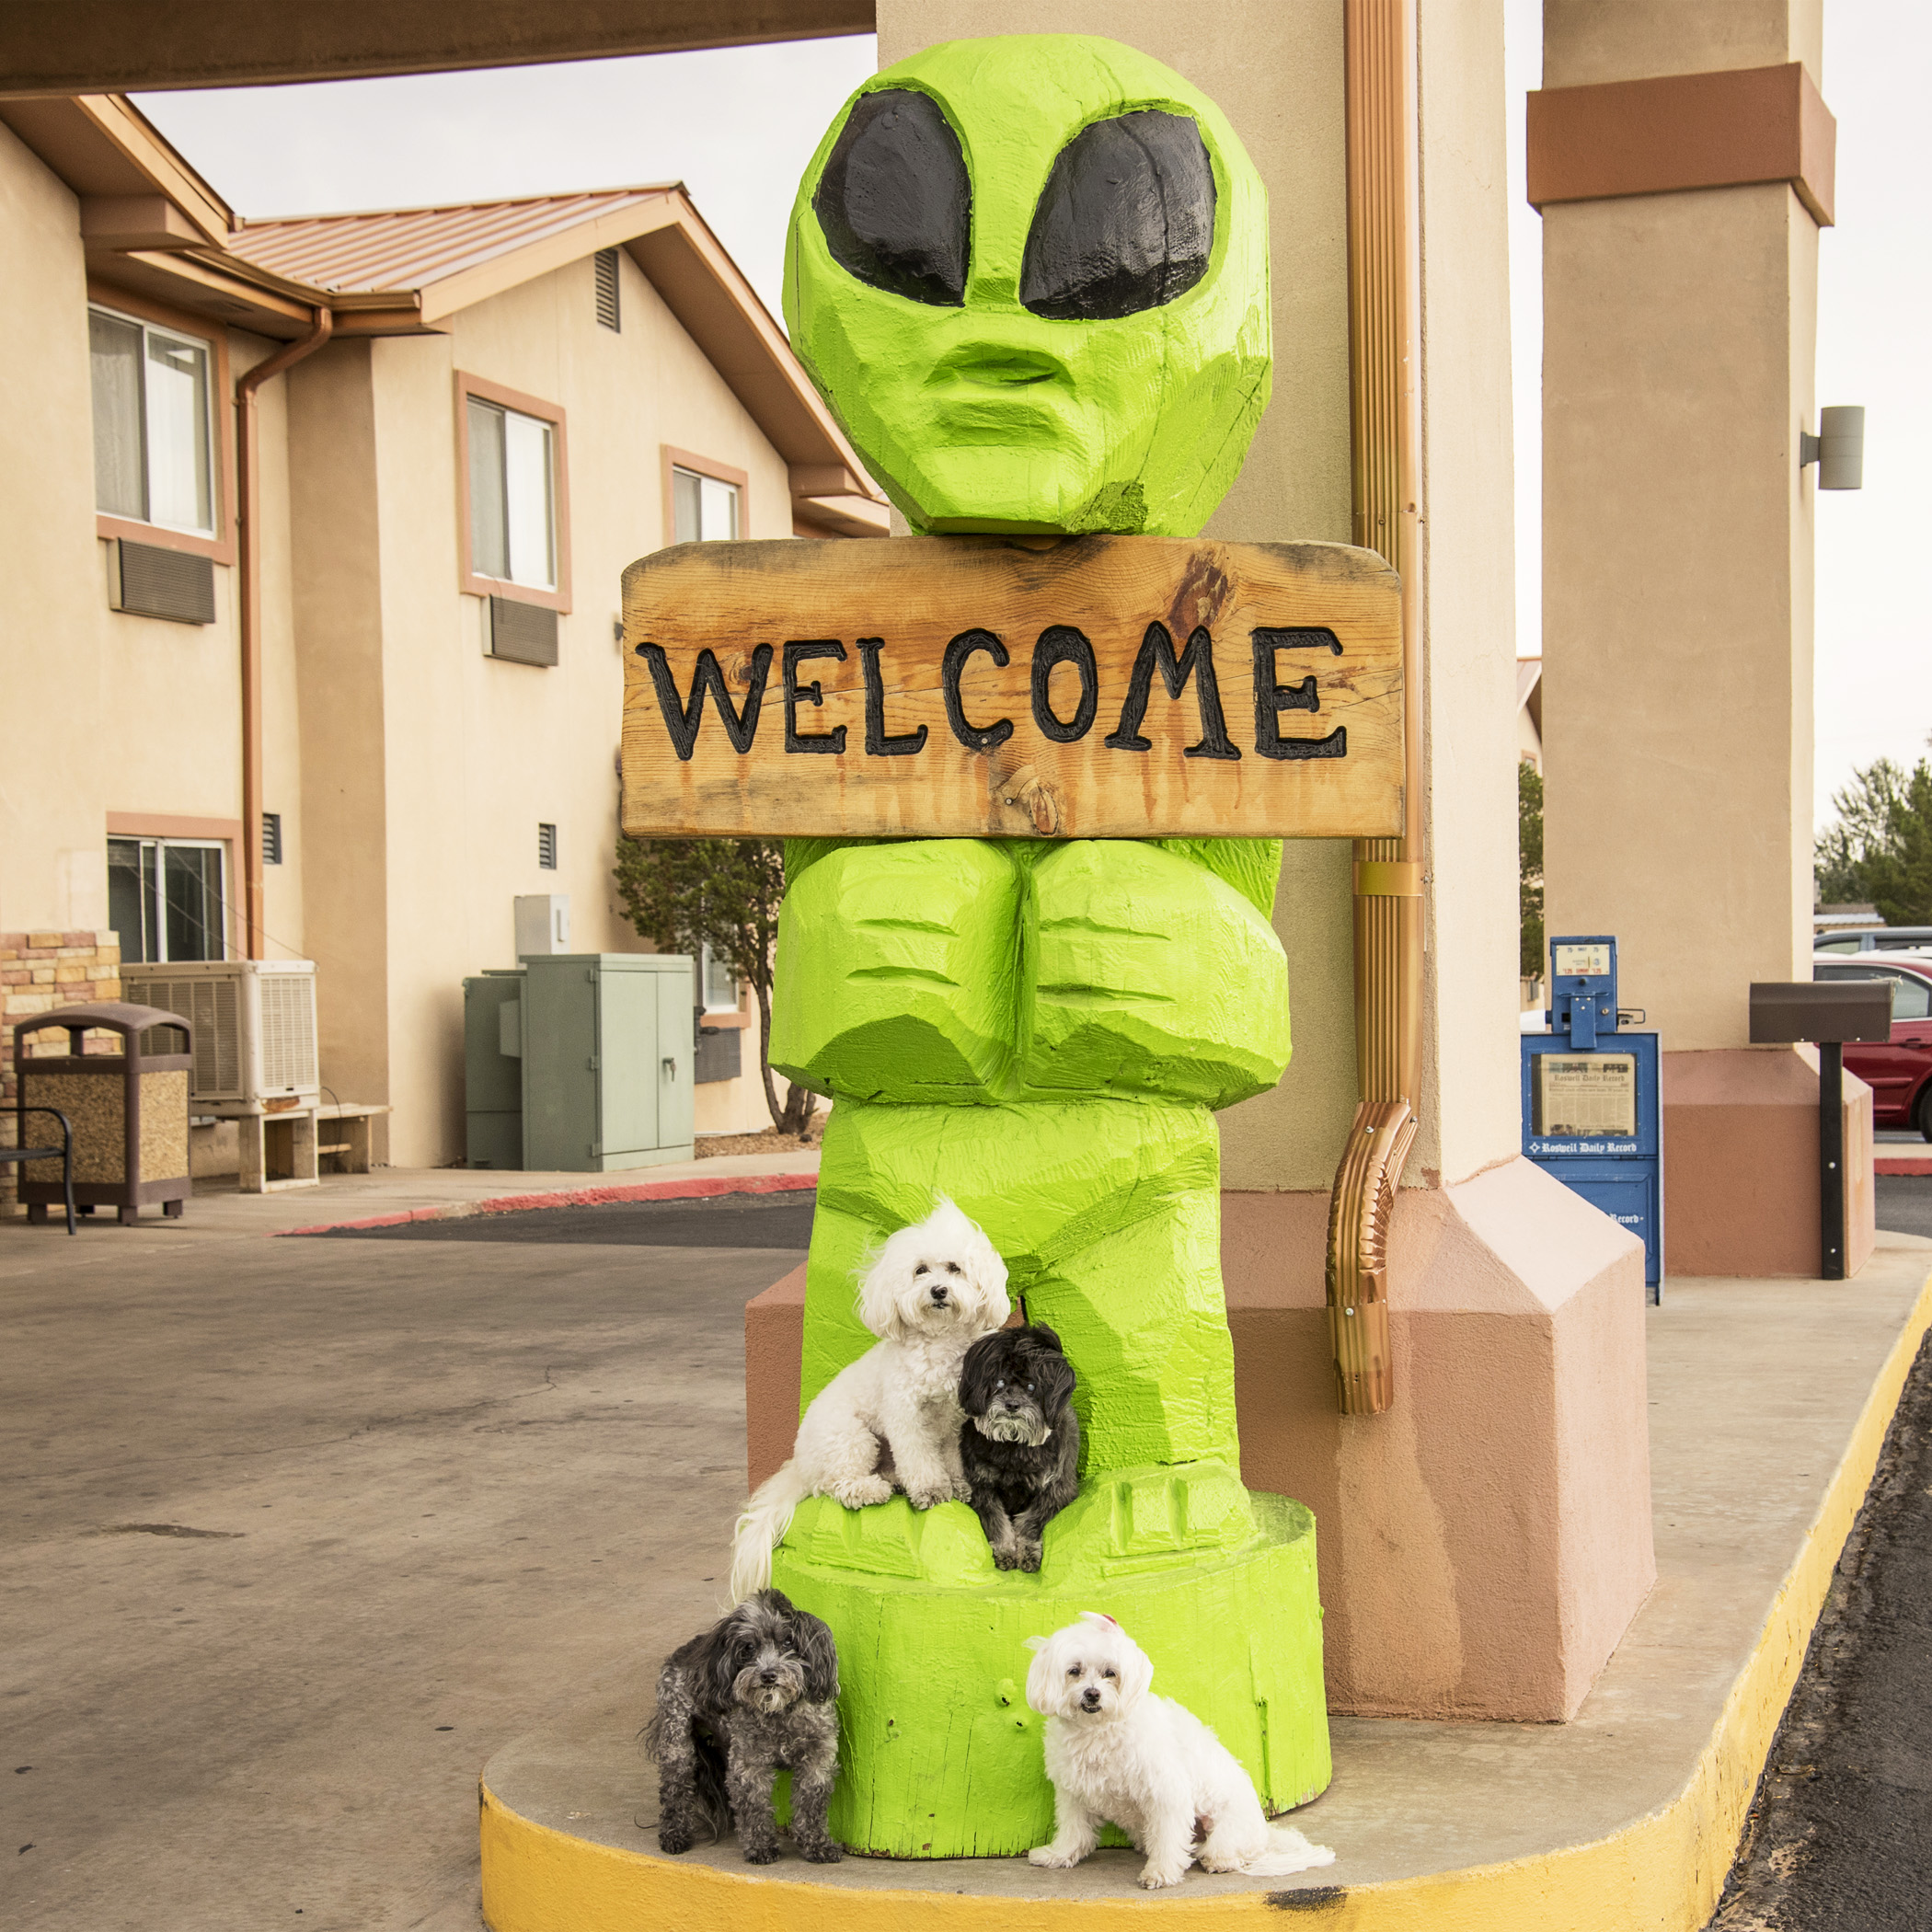  Nothing like being welcomed by the locals in Roswell, NM! 